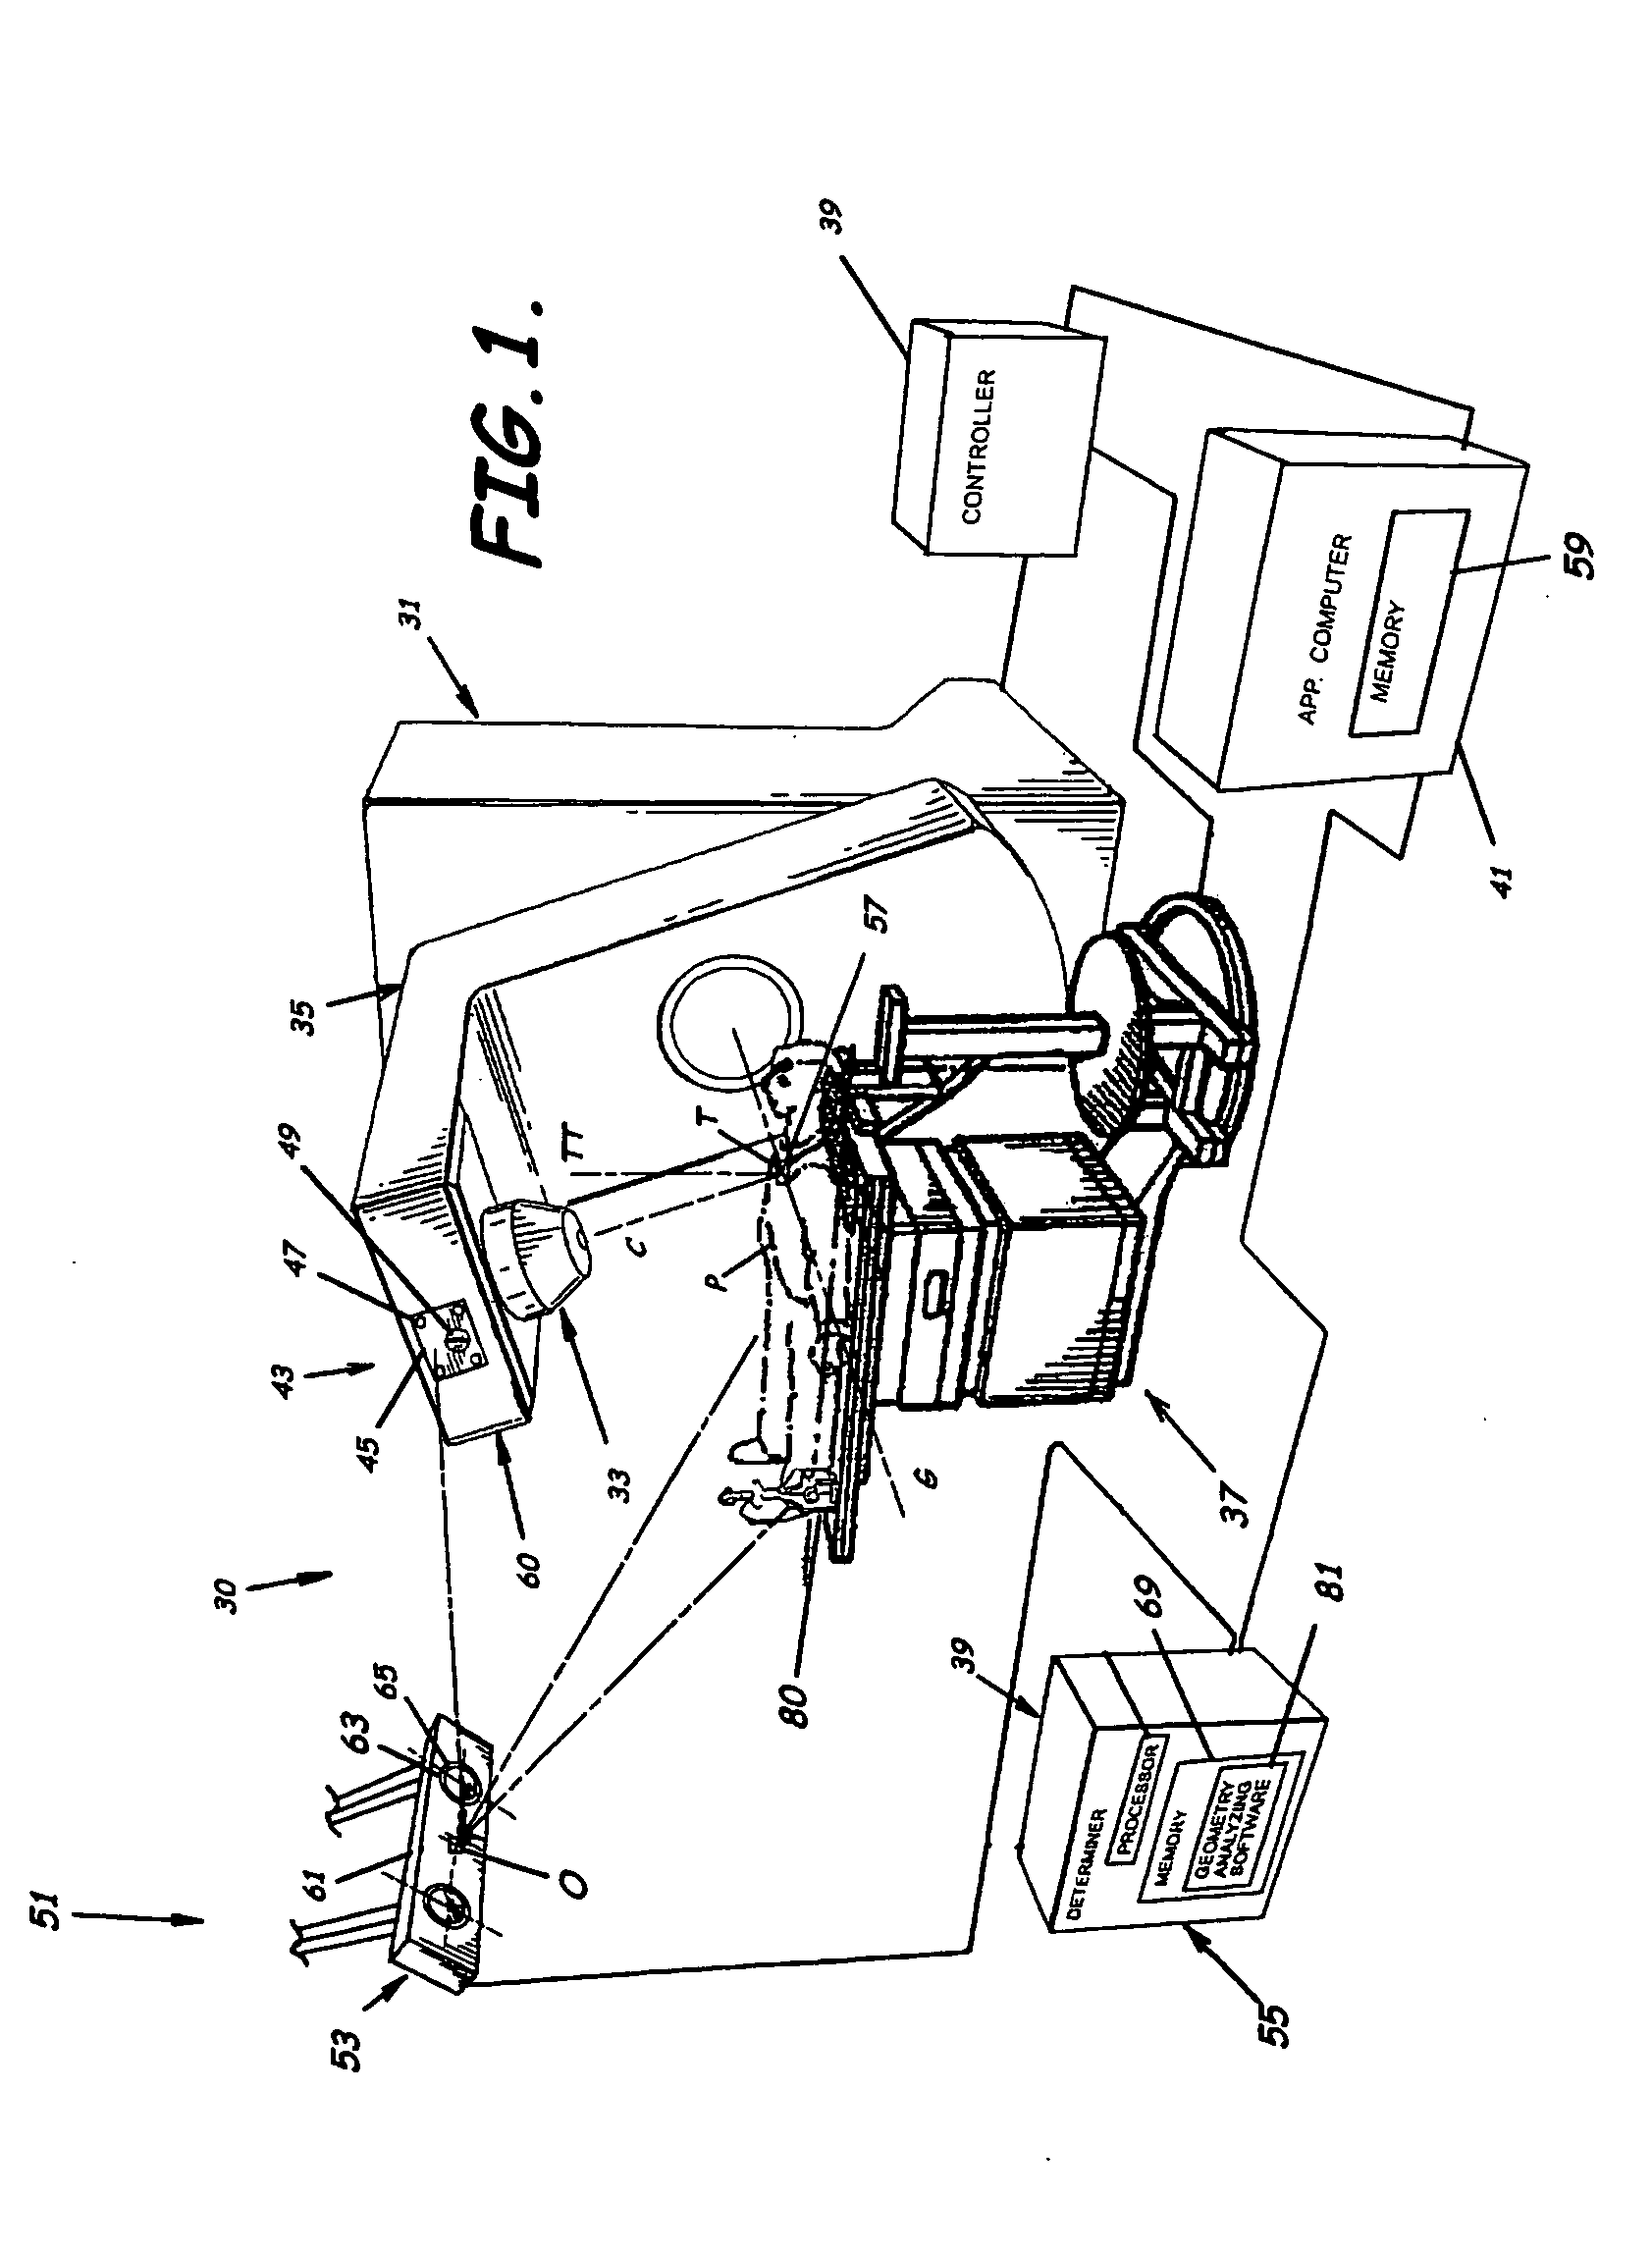 System for monitoring the geometry of a radiation treatment apparatus, trackable assembly, program product, and related methods